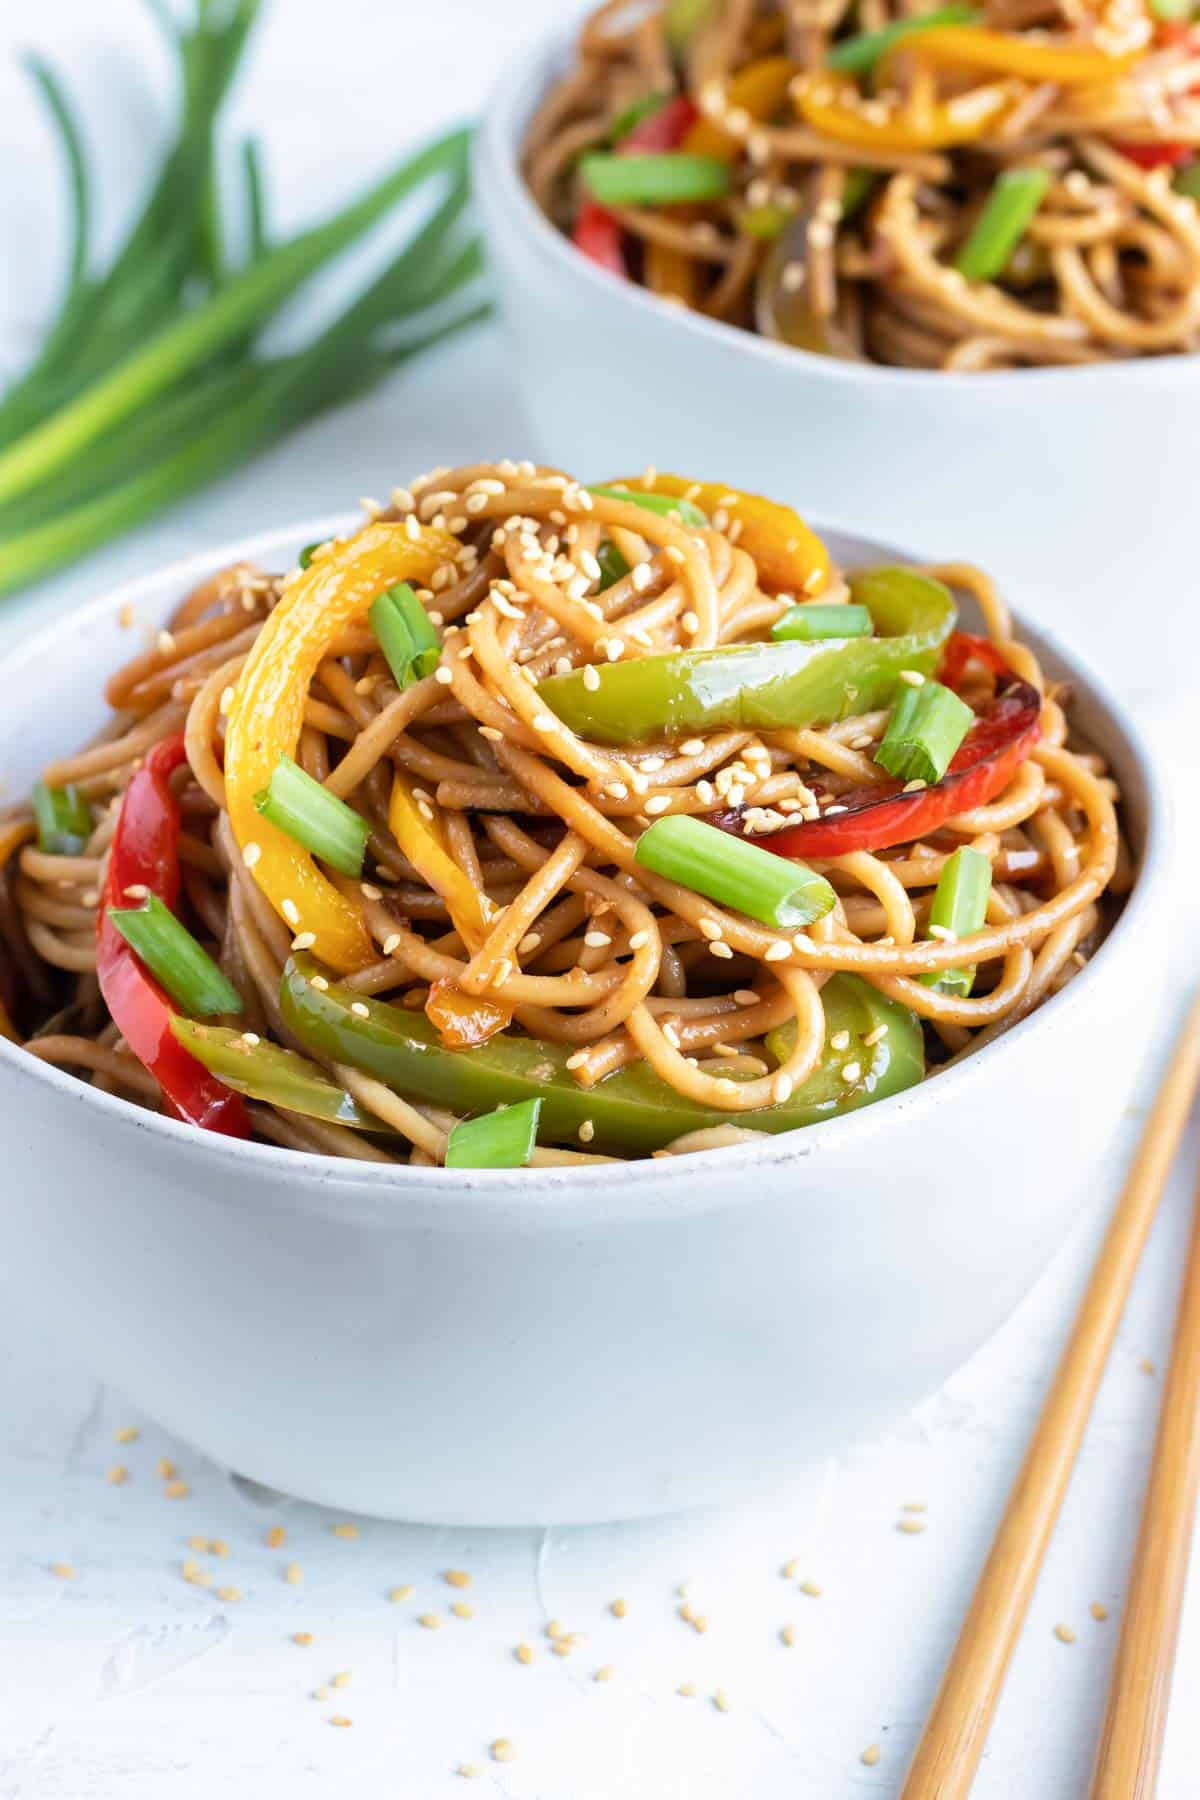 Cold sesame noodles with bell peppers in a white bowl with chopsticks and green onions next to it.